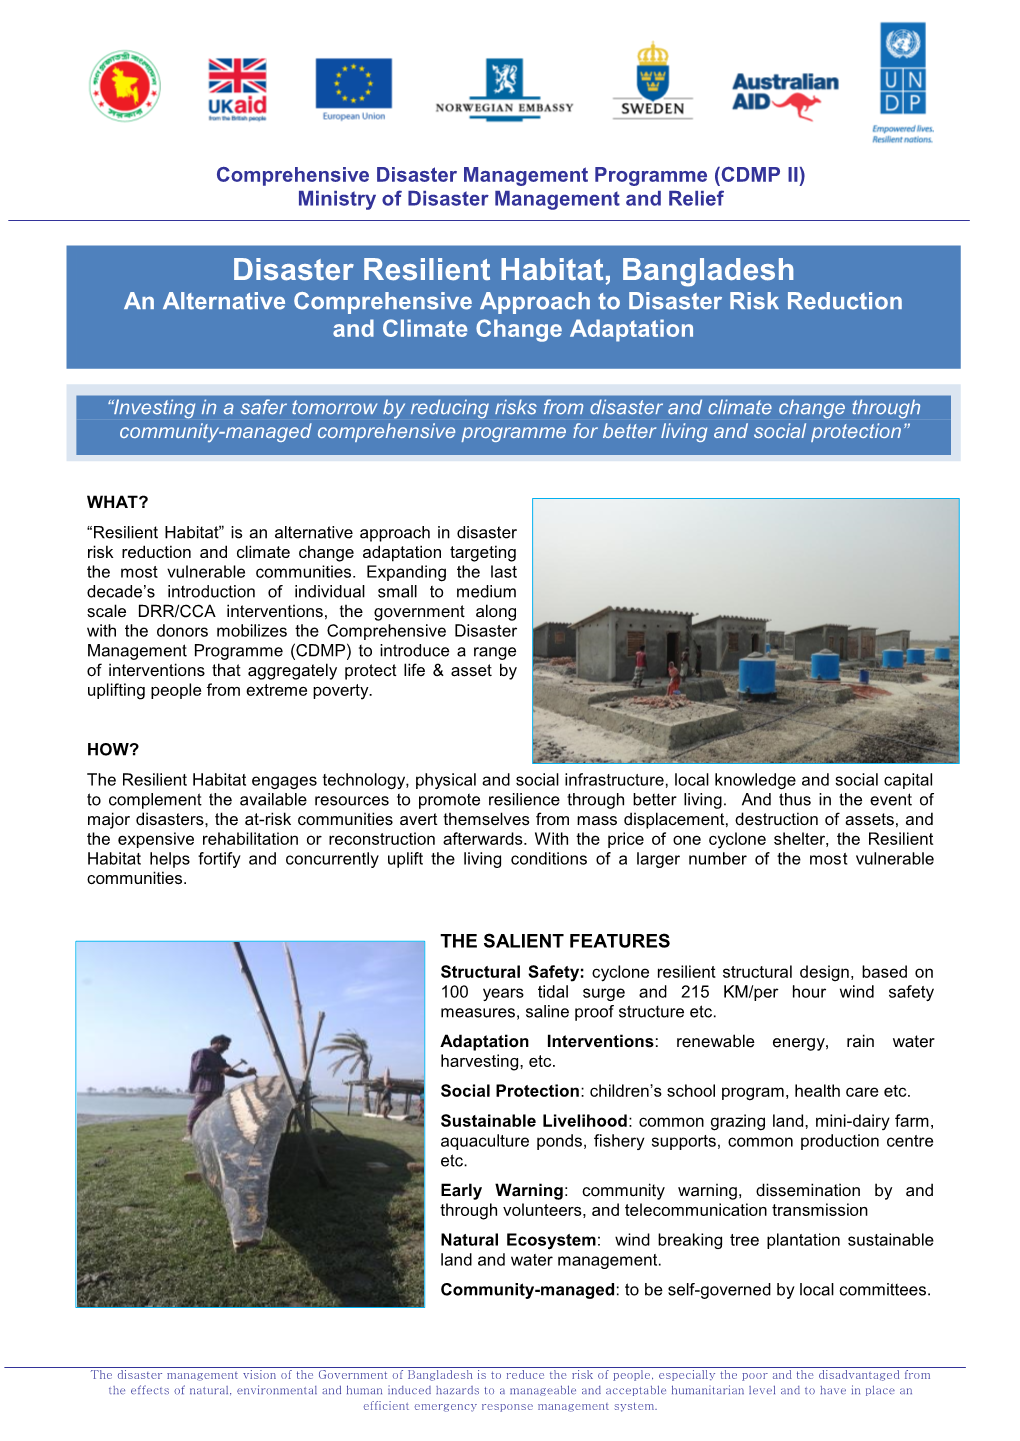 Disaster Resilient Habitat, Bangladesh an Alternative Comprehensive Approach to Disaster Risk Reduction and Climate Change Adaptation